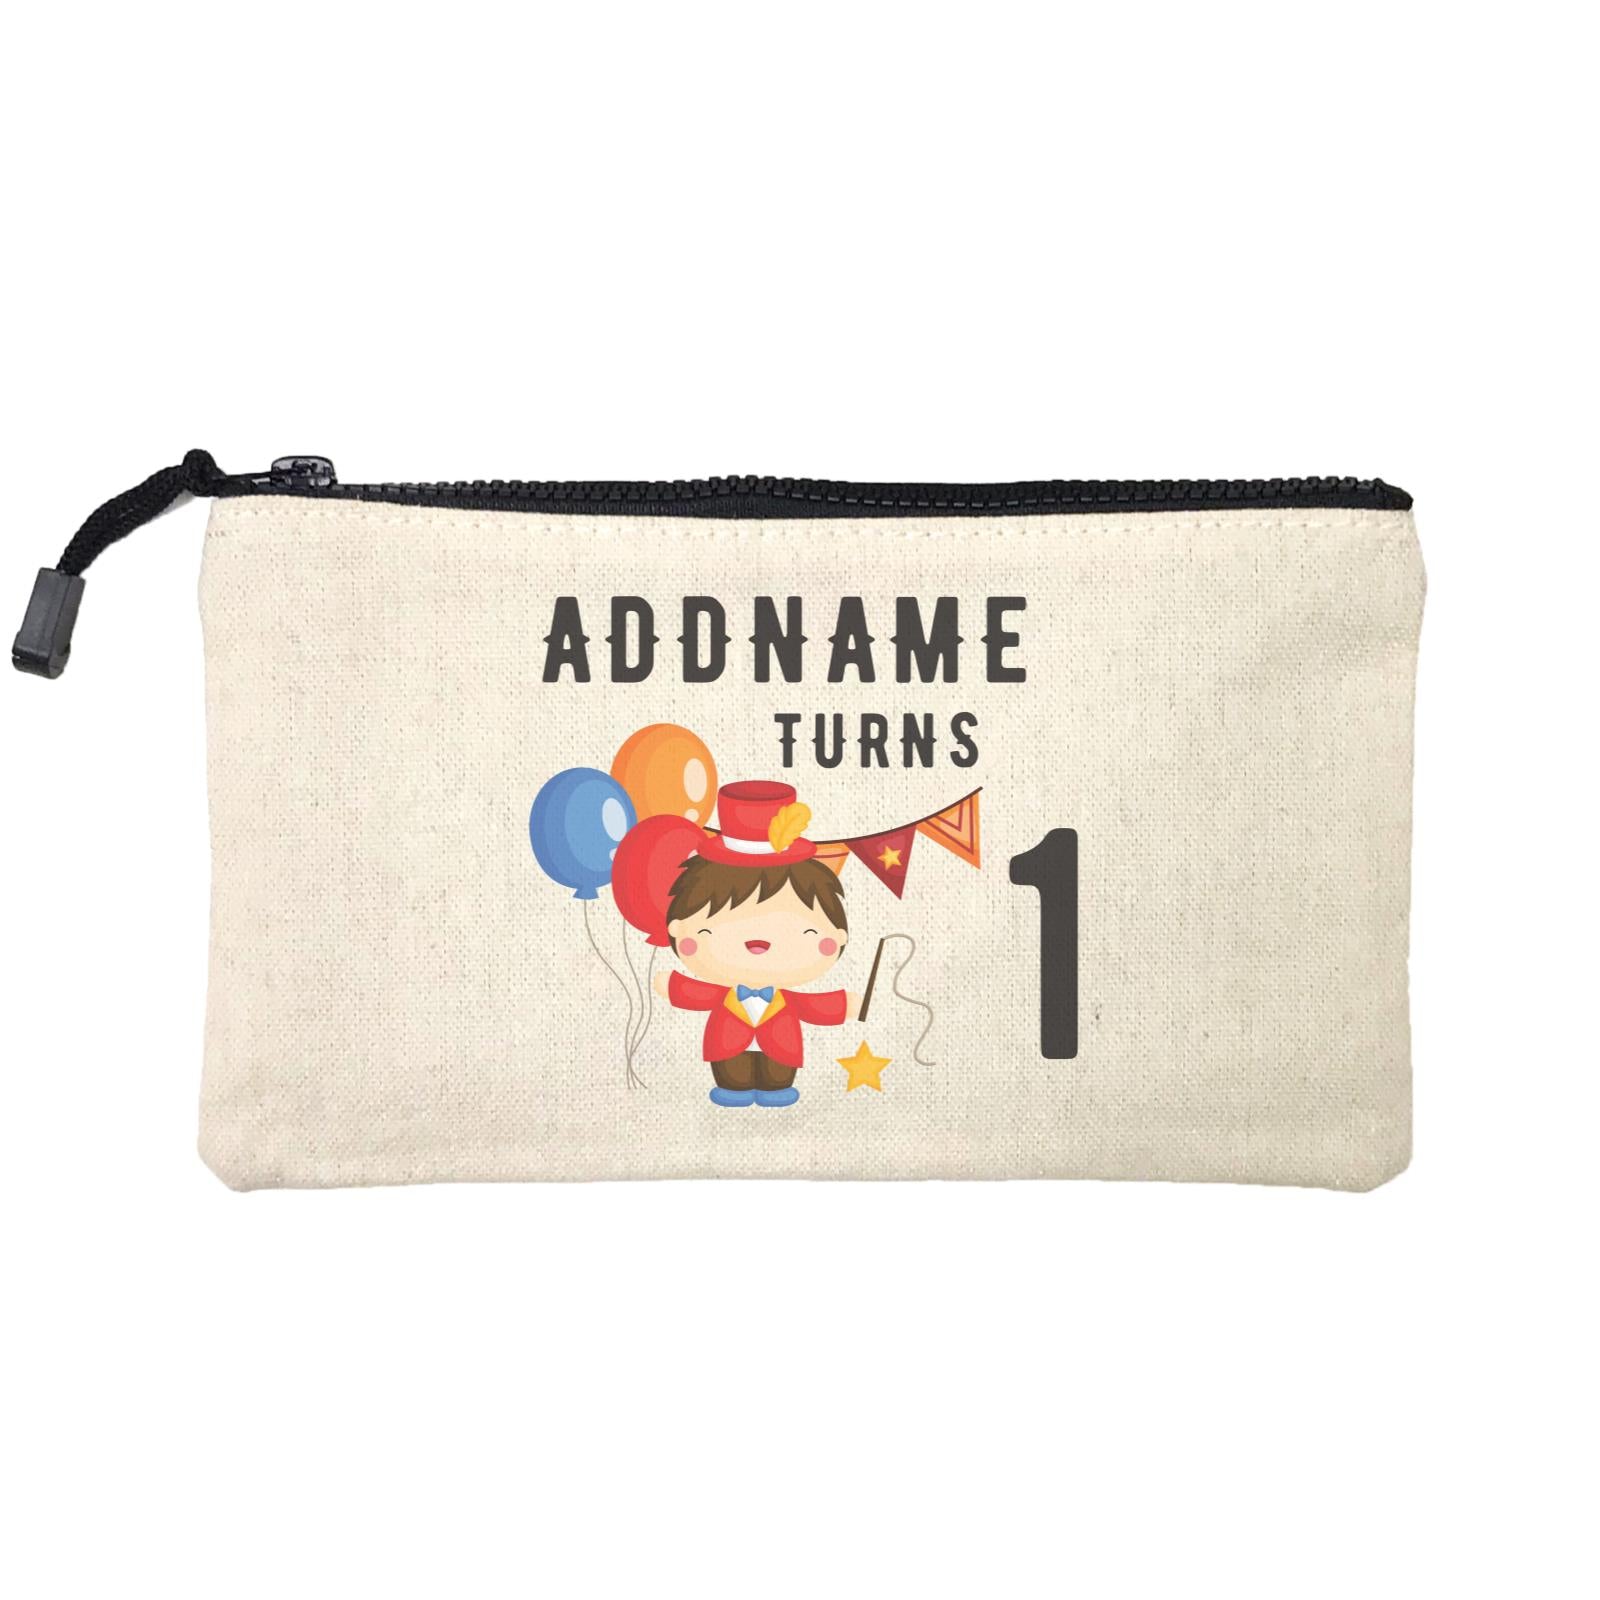 Birthday Circus Happy Boy Leader of Performance Addname Turns 1 Mini Accessories Stationery Pouch